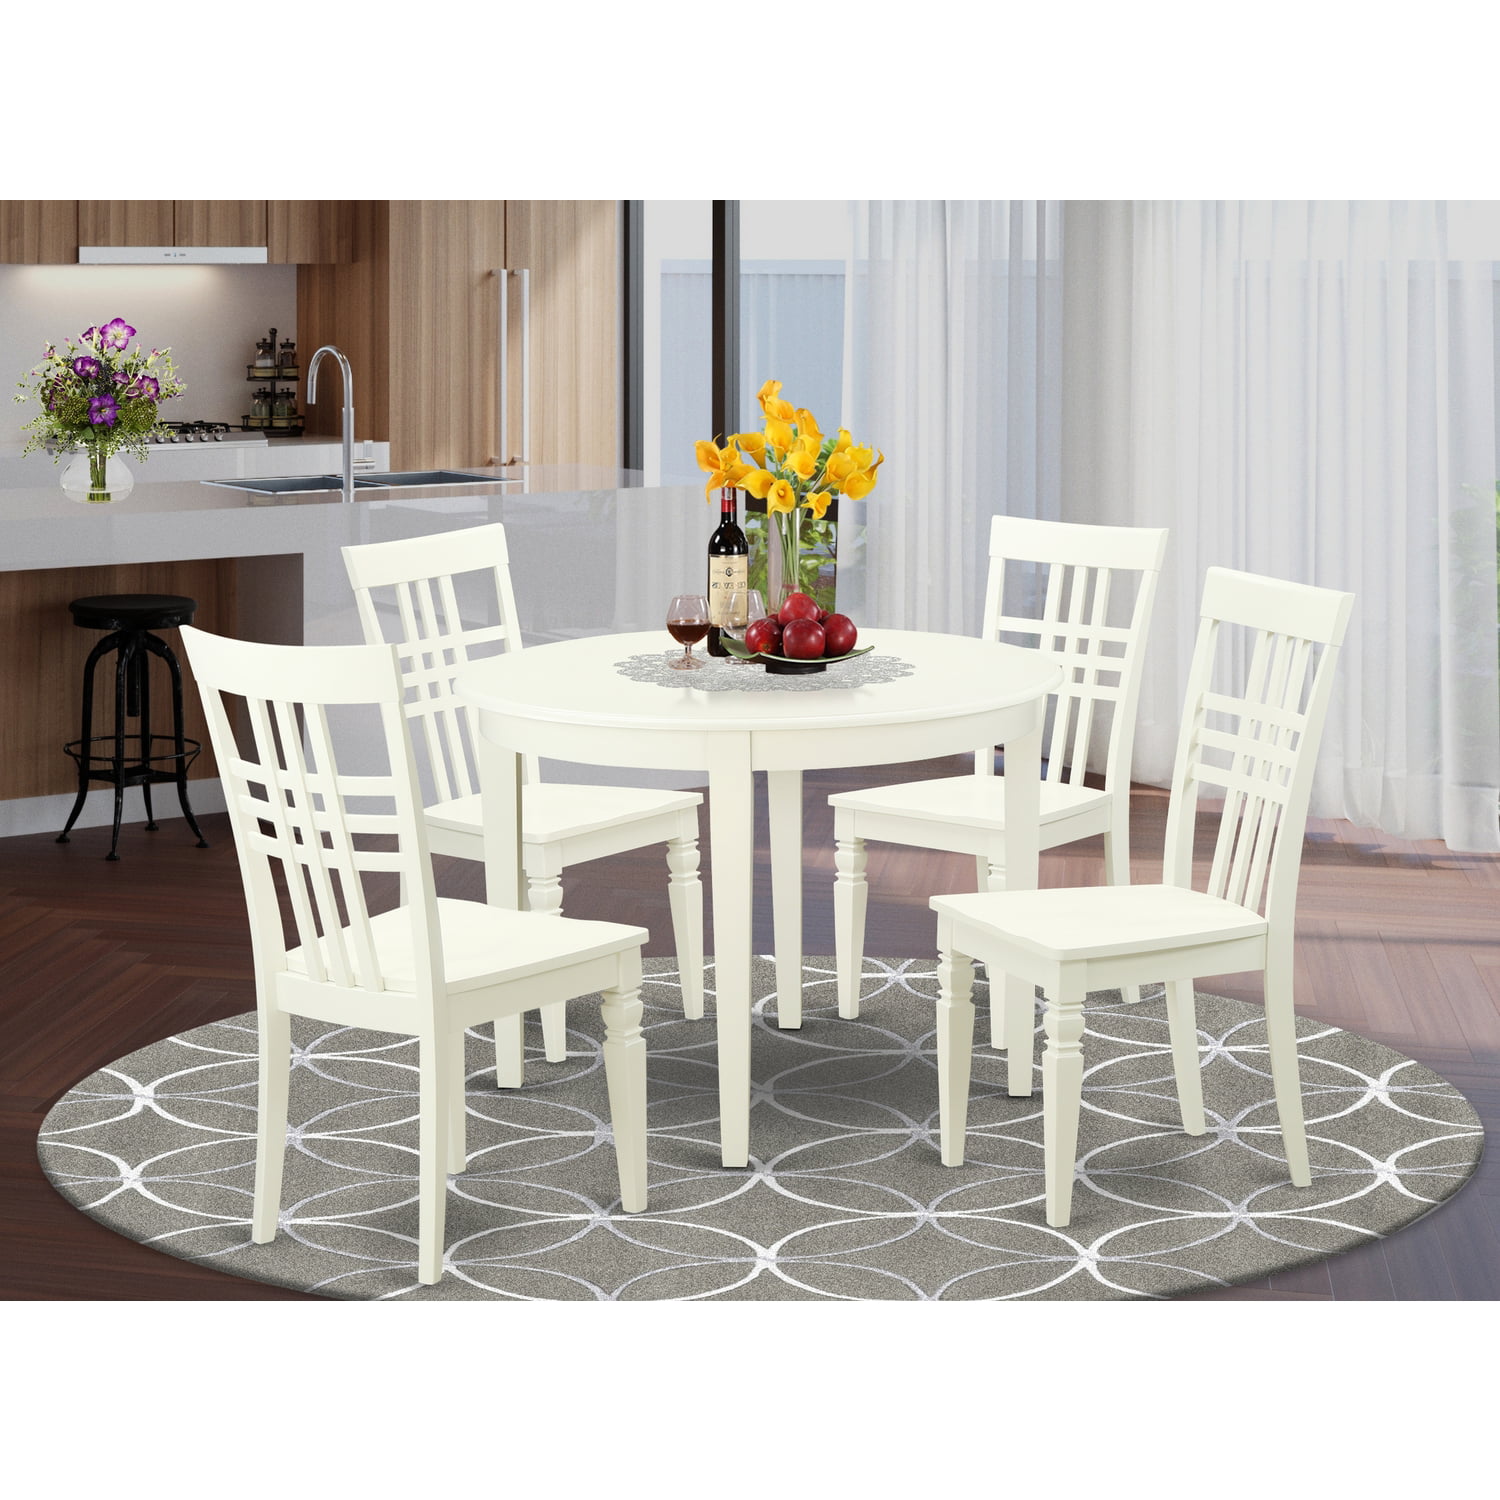 Small Kitchen Table Set With A Boston Dining Table And Kitchen Chairs